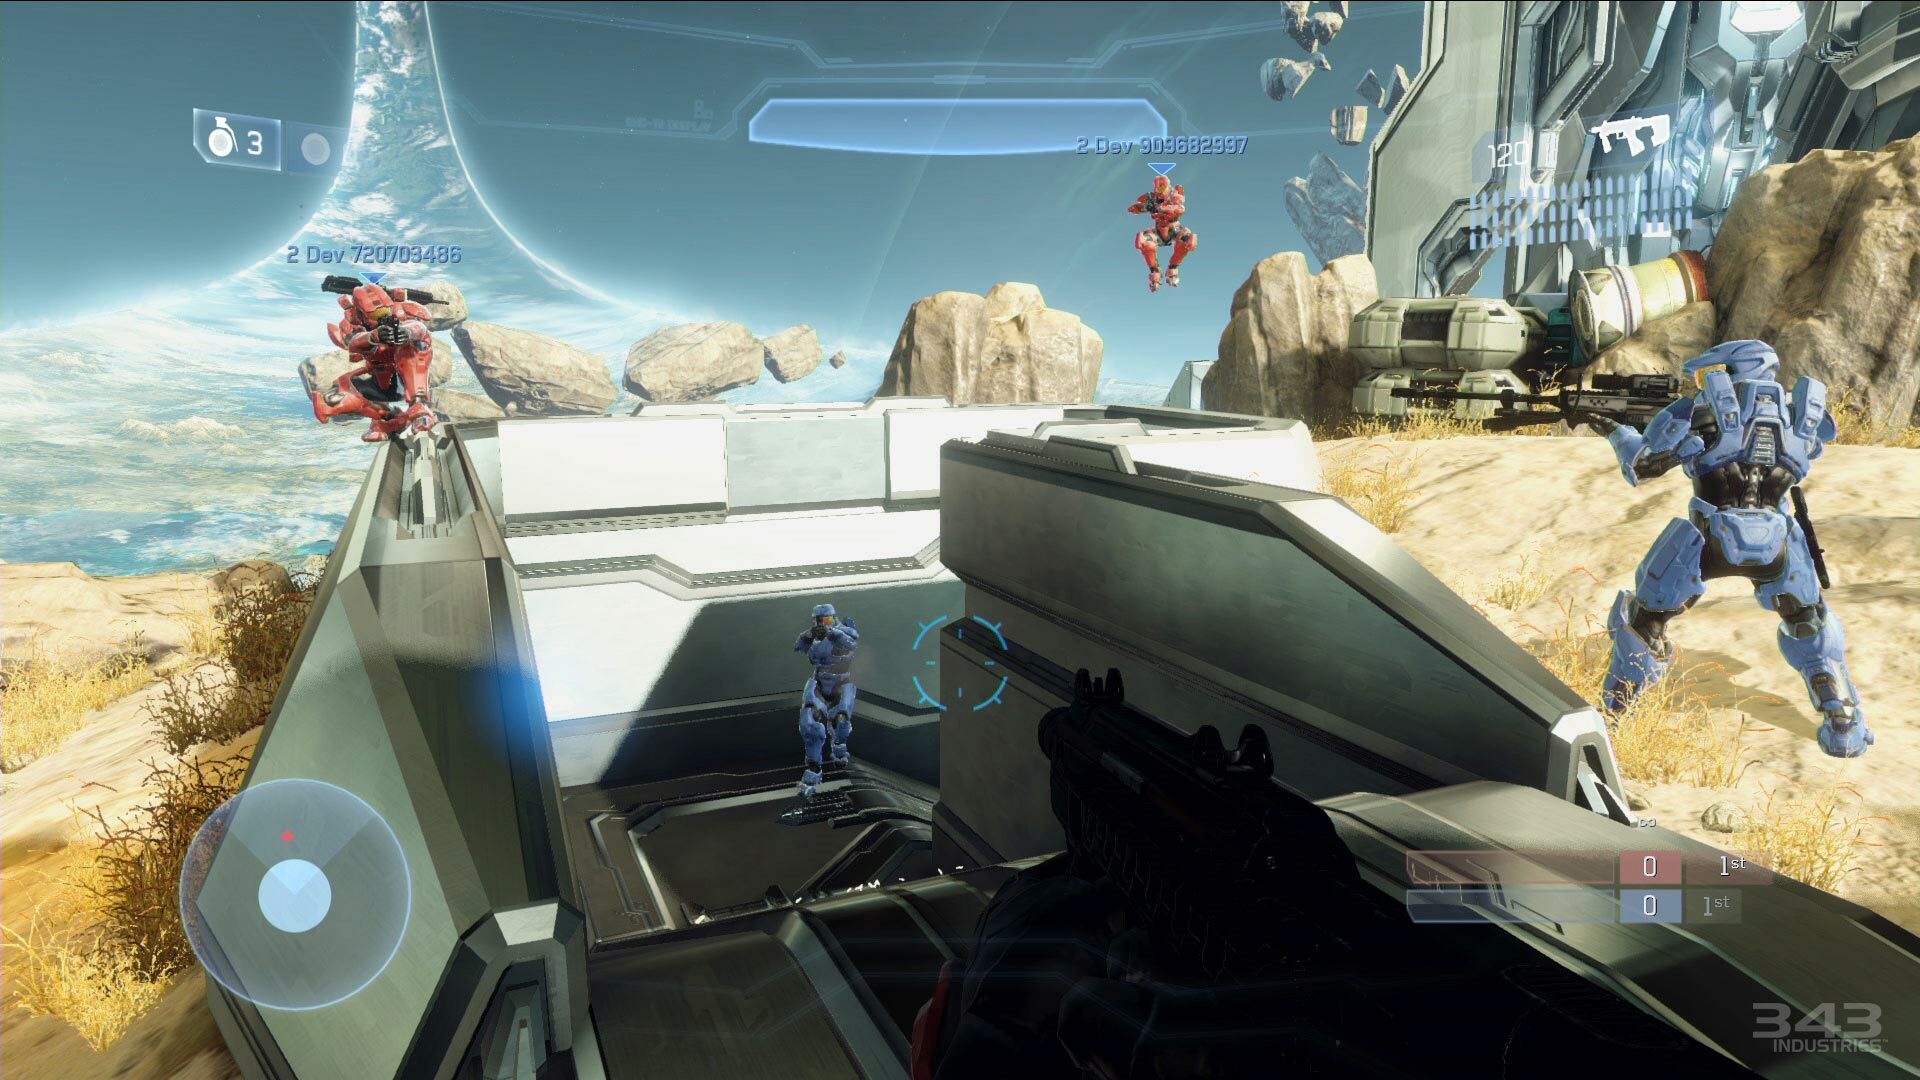 Halo 2: Anniversary - first impressions from Gamescom 2014